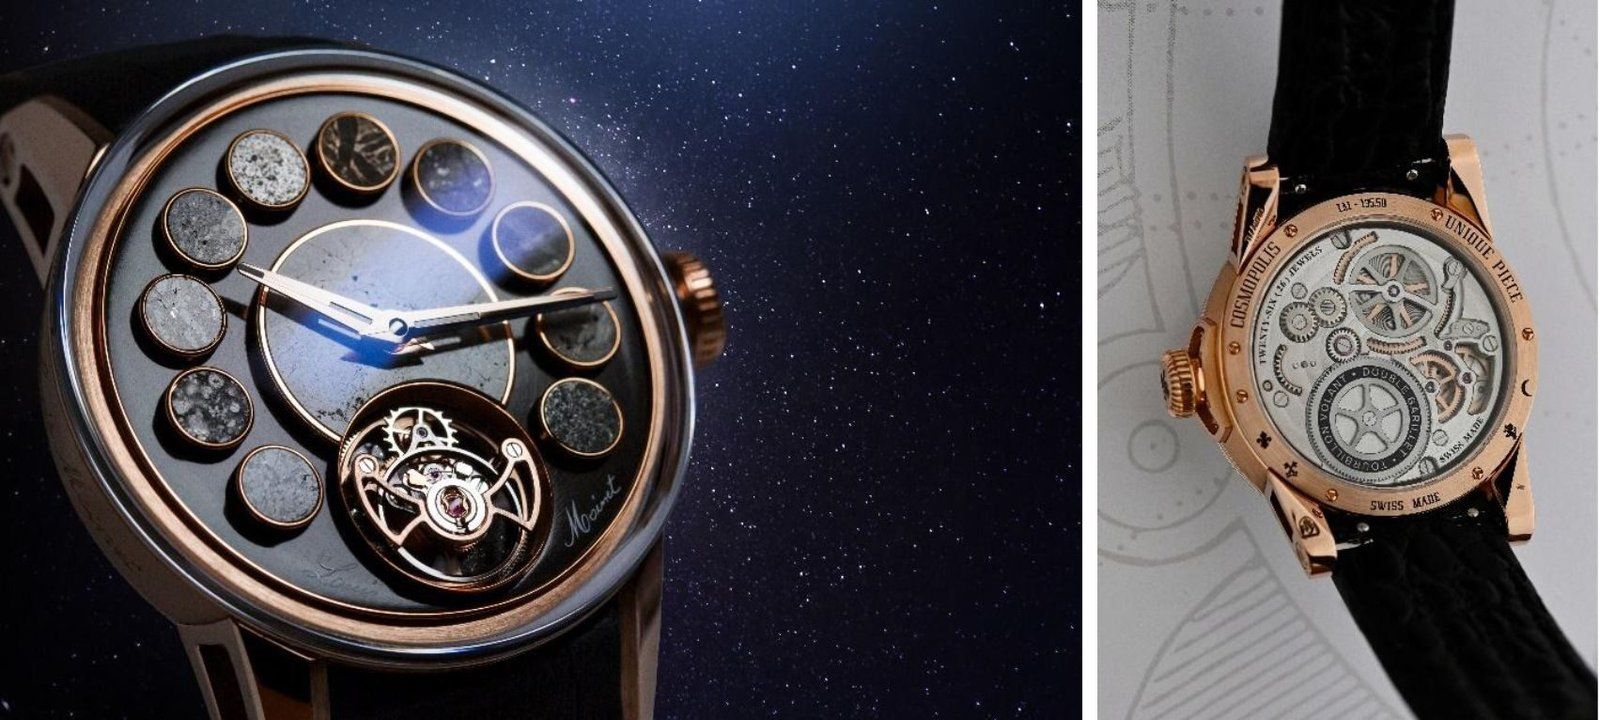 The timepiece is powered by the in-house LM-135.50 caliber with a flying tourbillon escapement.